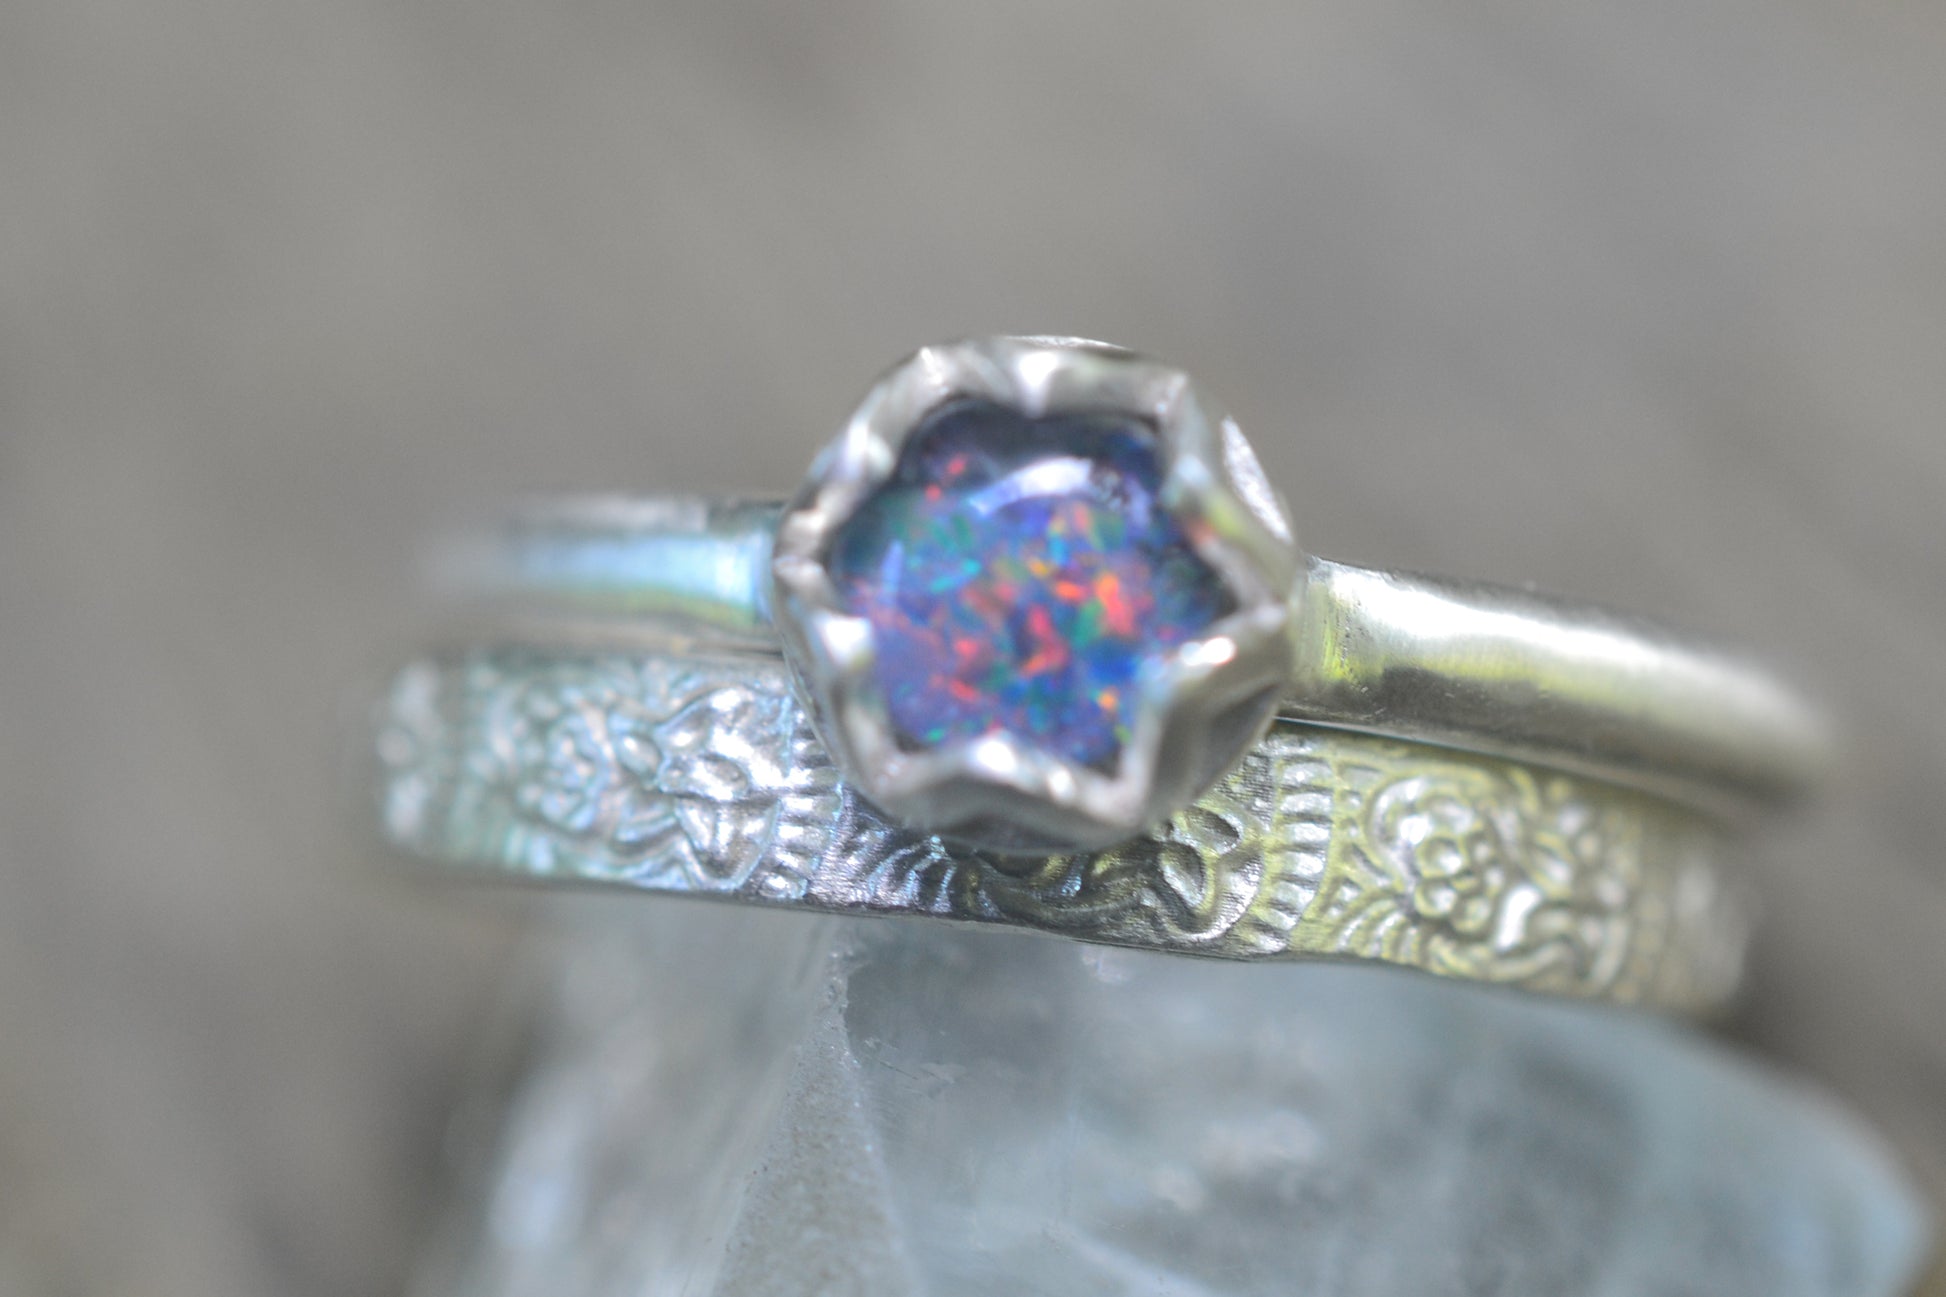 5mm Opal Stacking Set in Sterling Silver